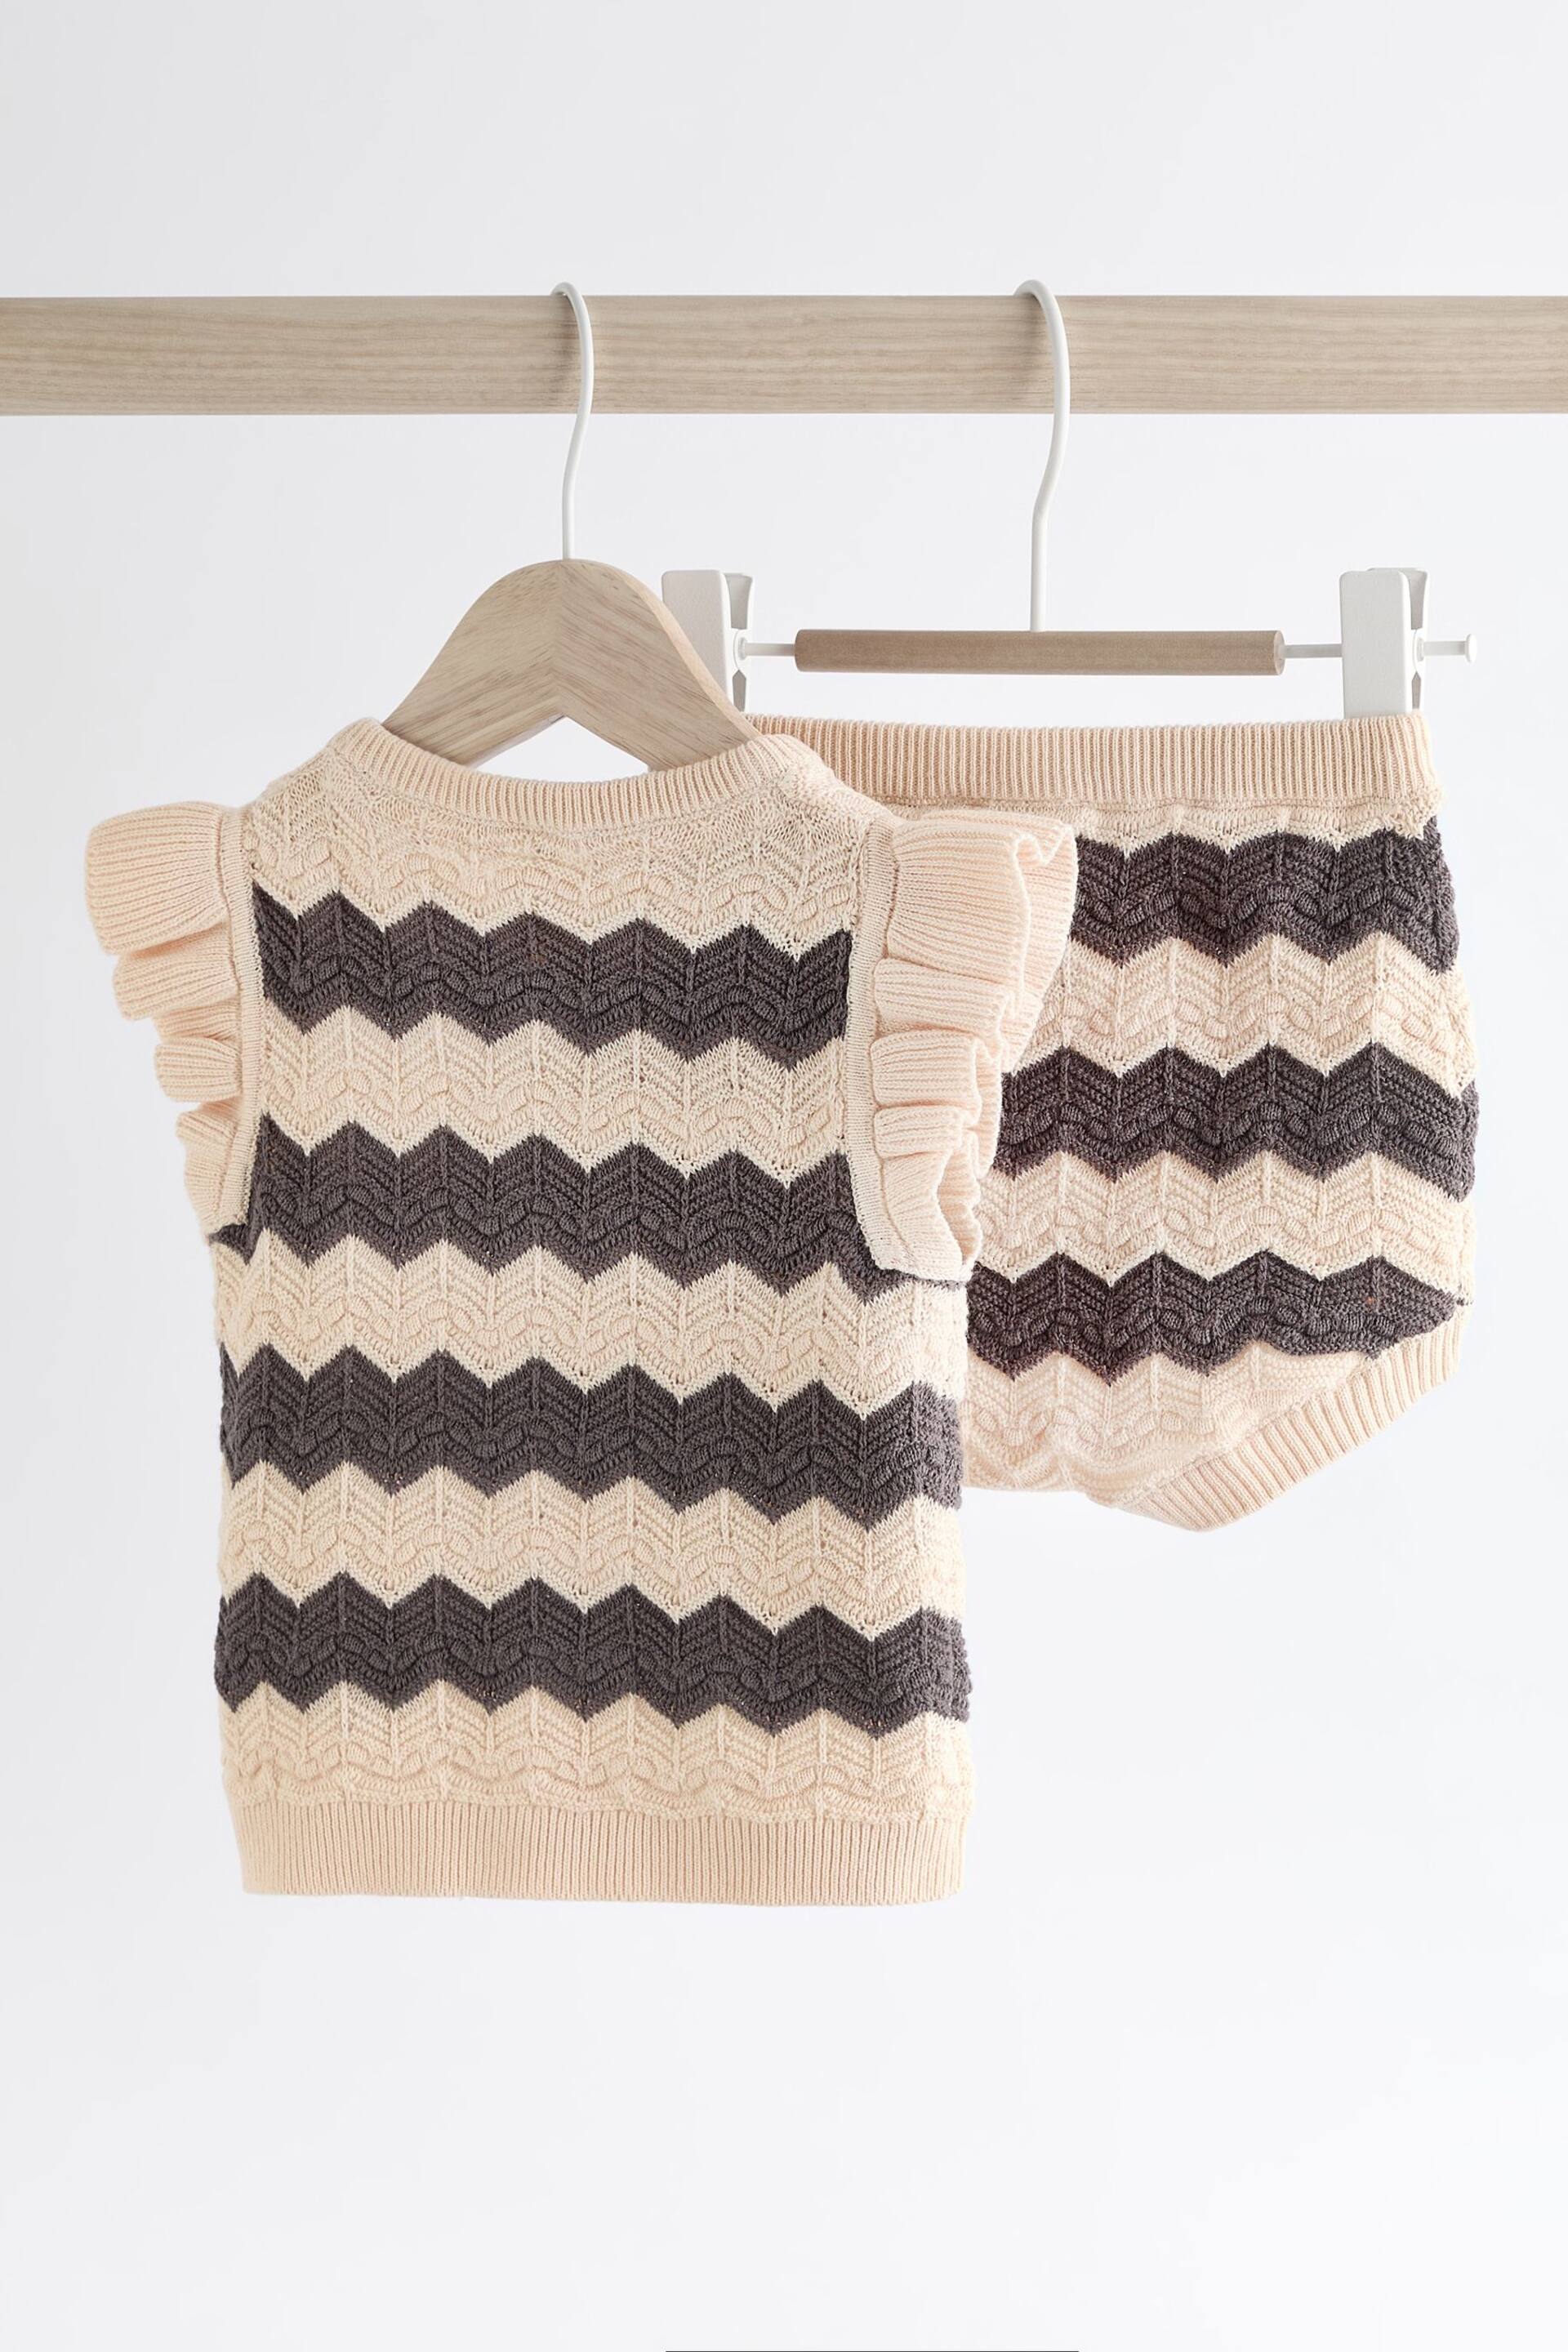 Tan/ Monochrome Zig Zag Stripe Baby Knitted Crochet Top And Shorts Set (0mths-2yrs) - Image 2 of 9